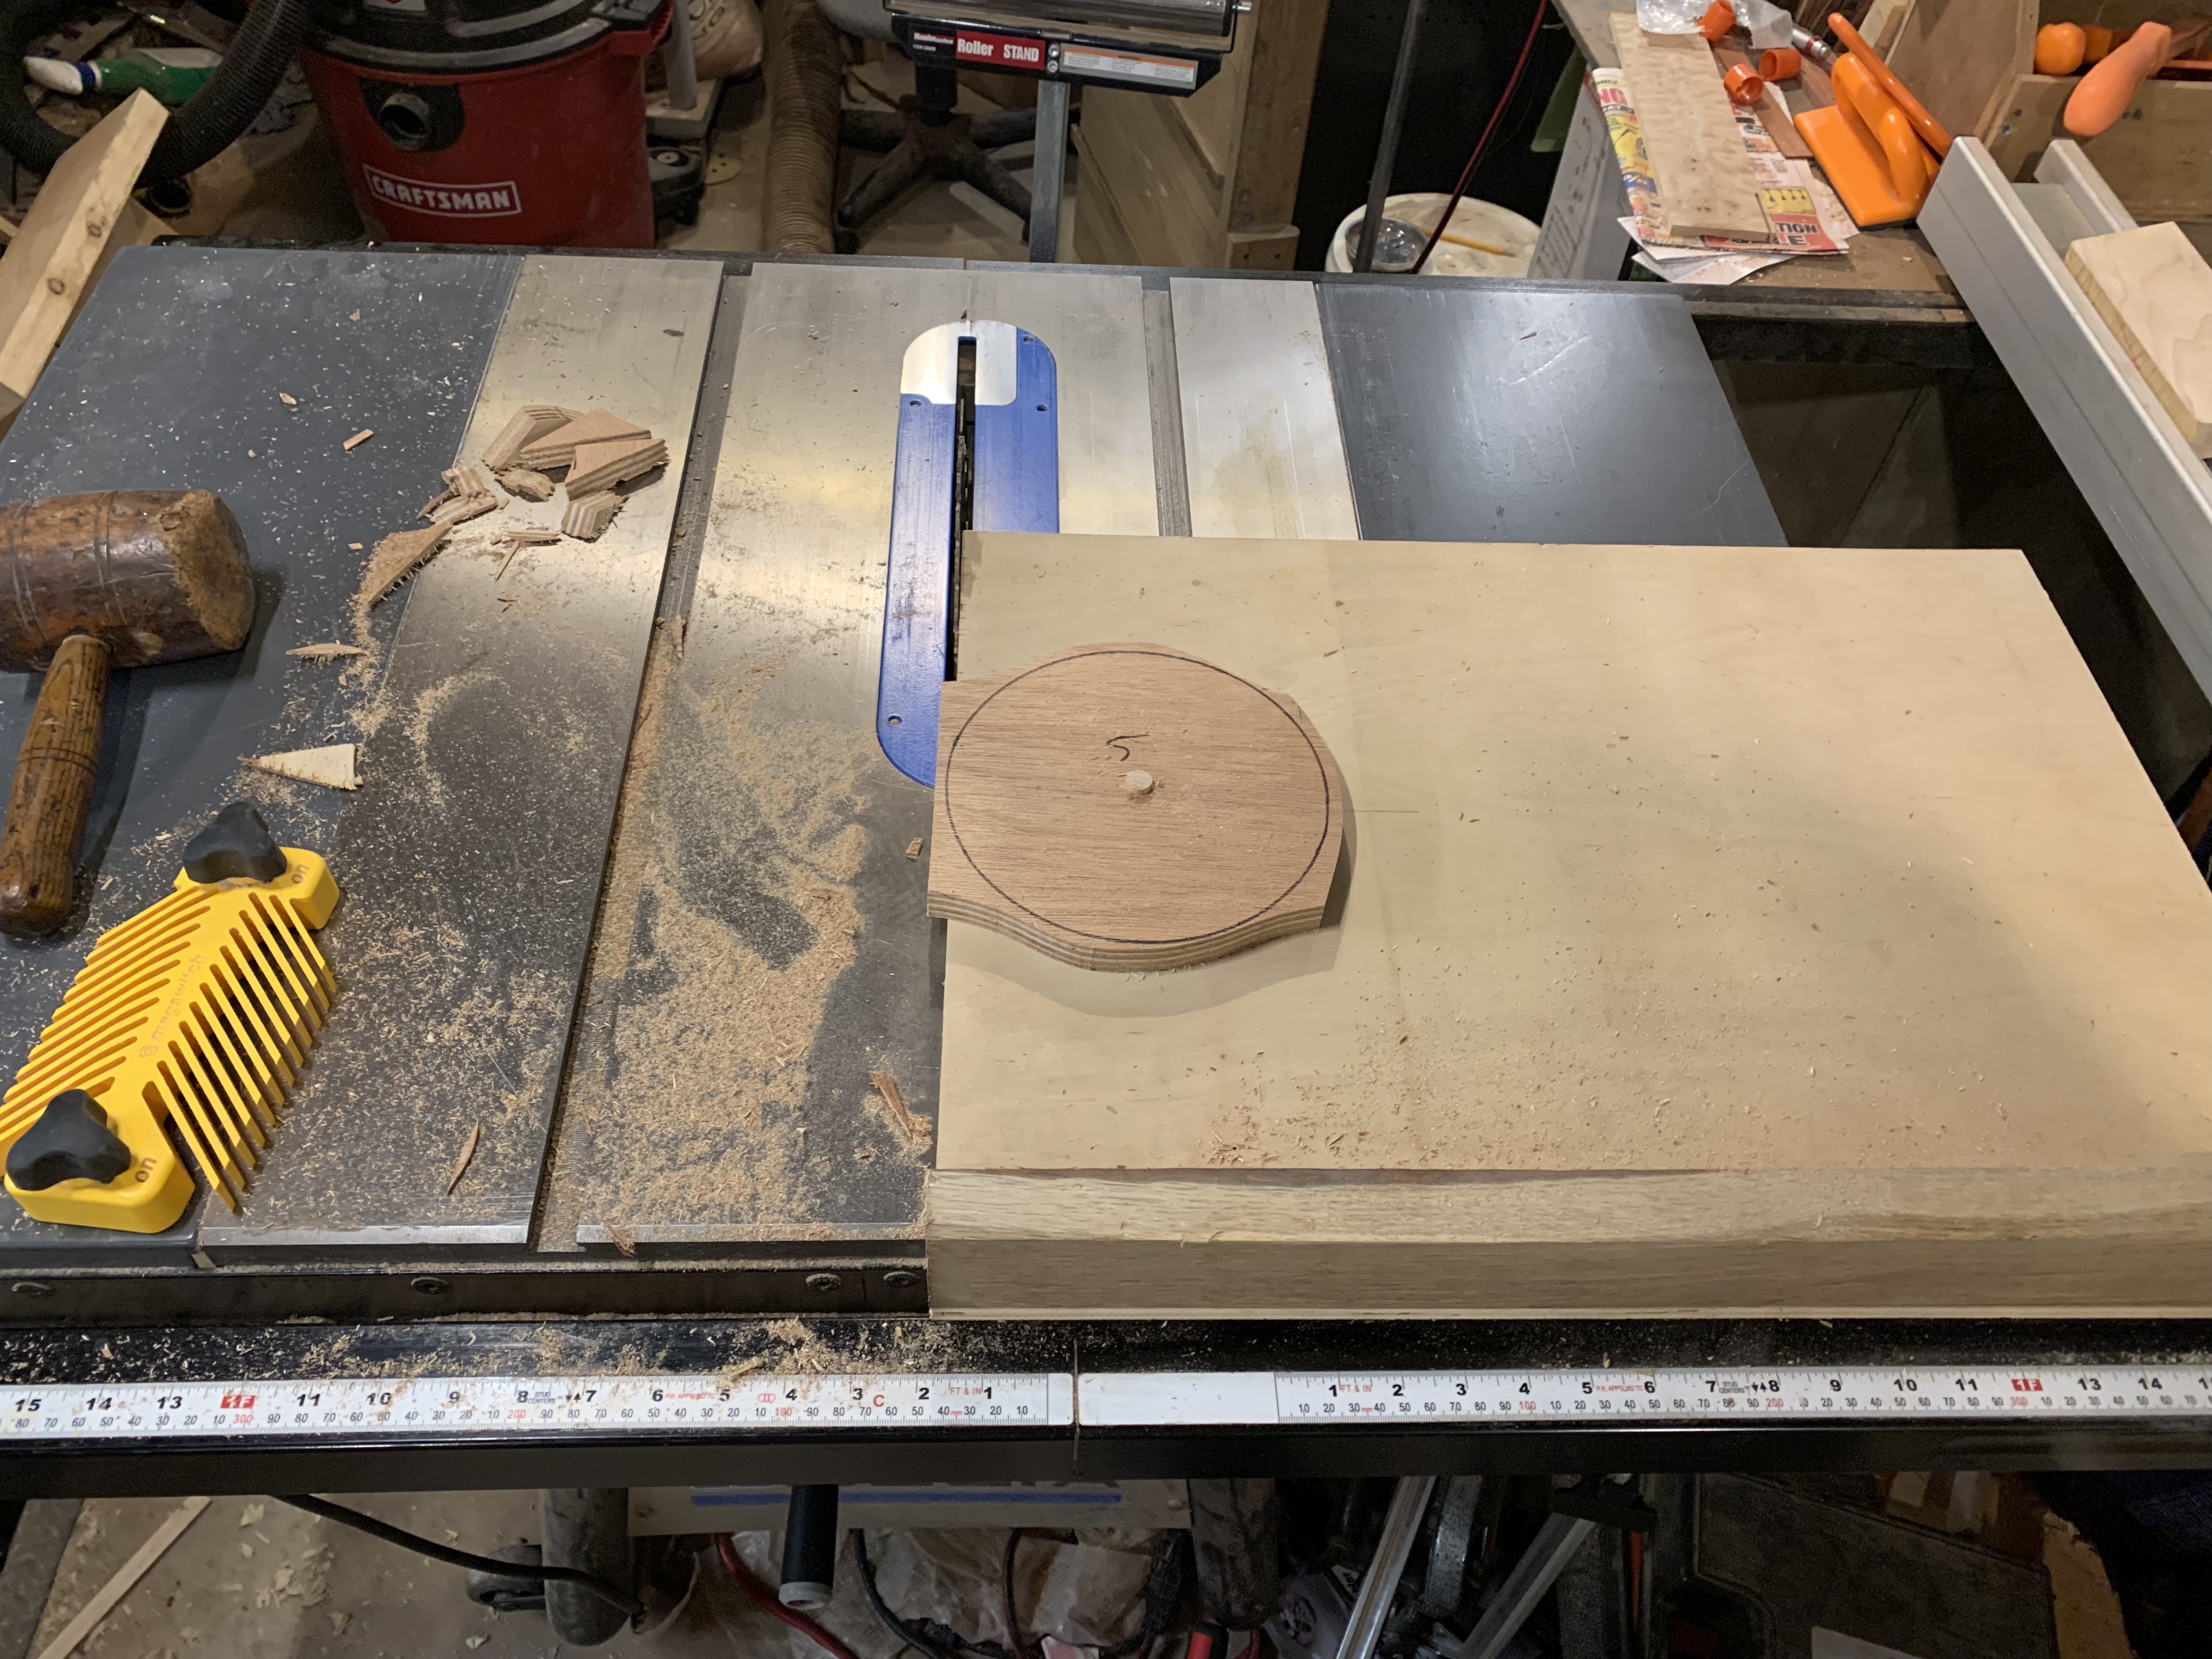 Cutting discs with table saw jig